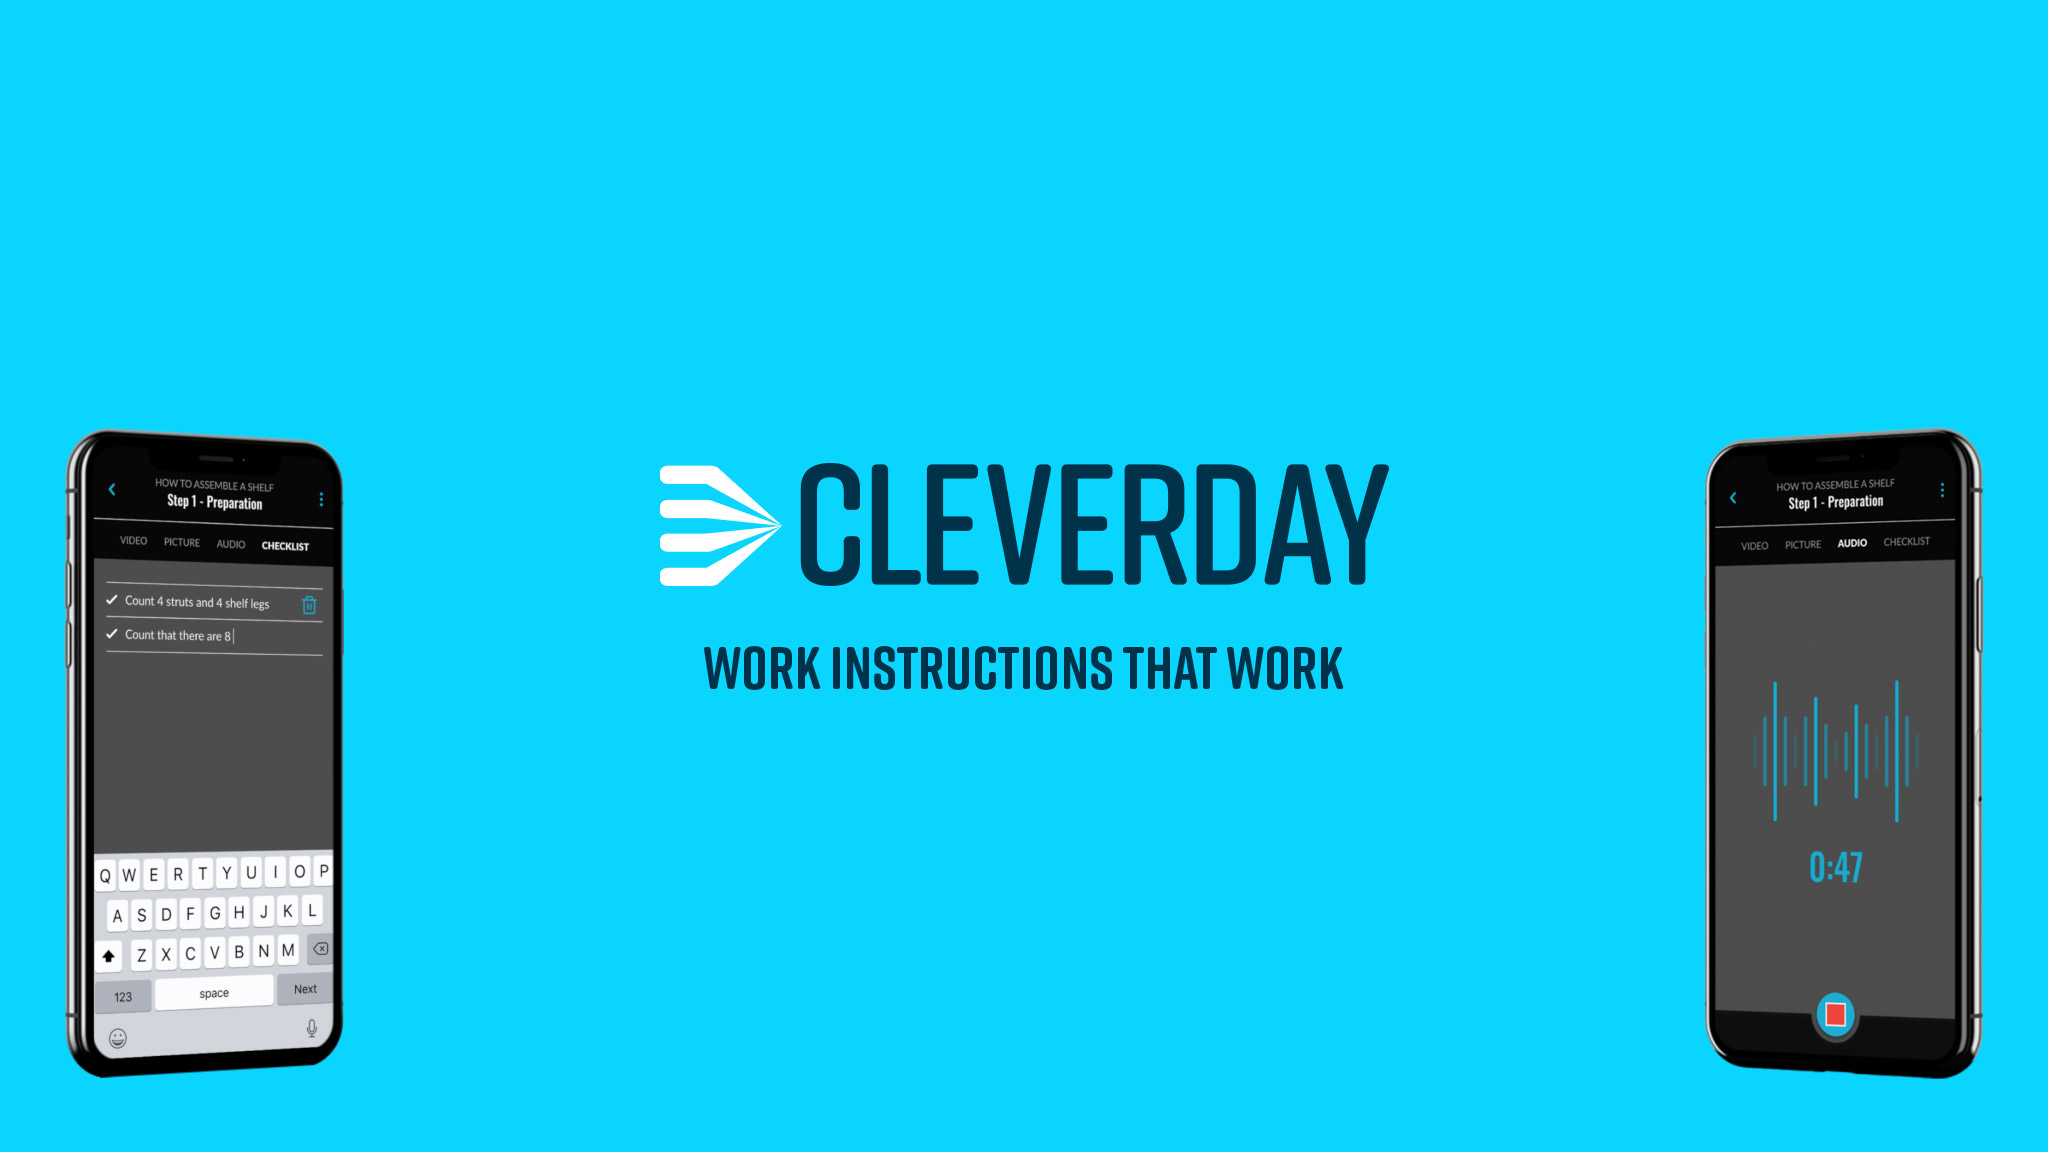 Cleverday - Work instructions app